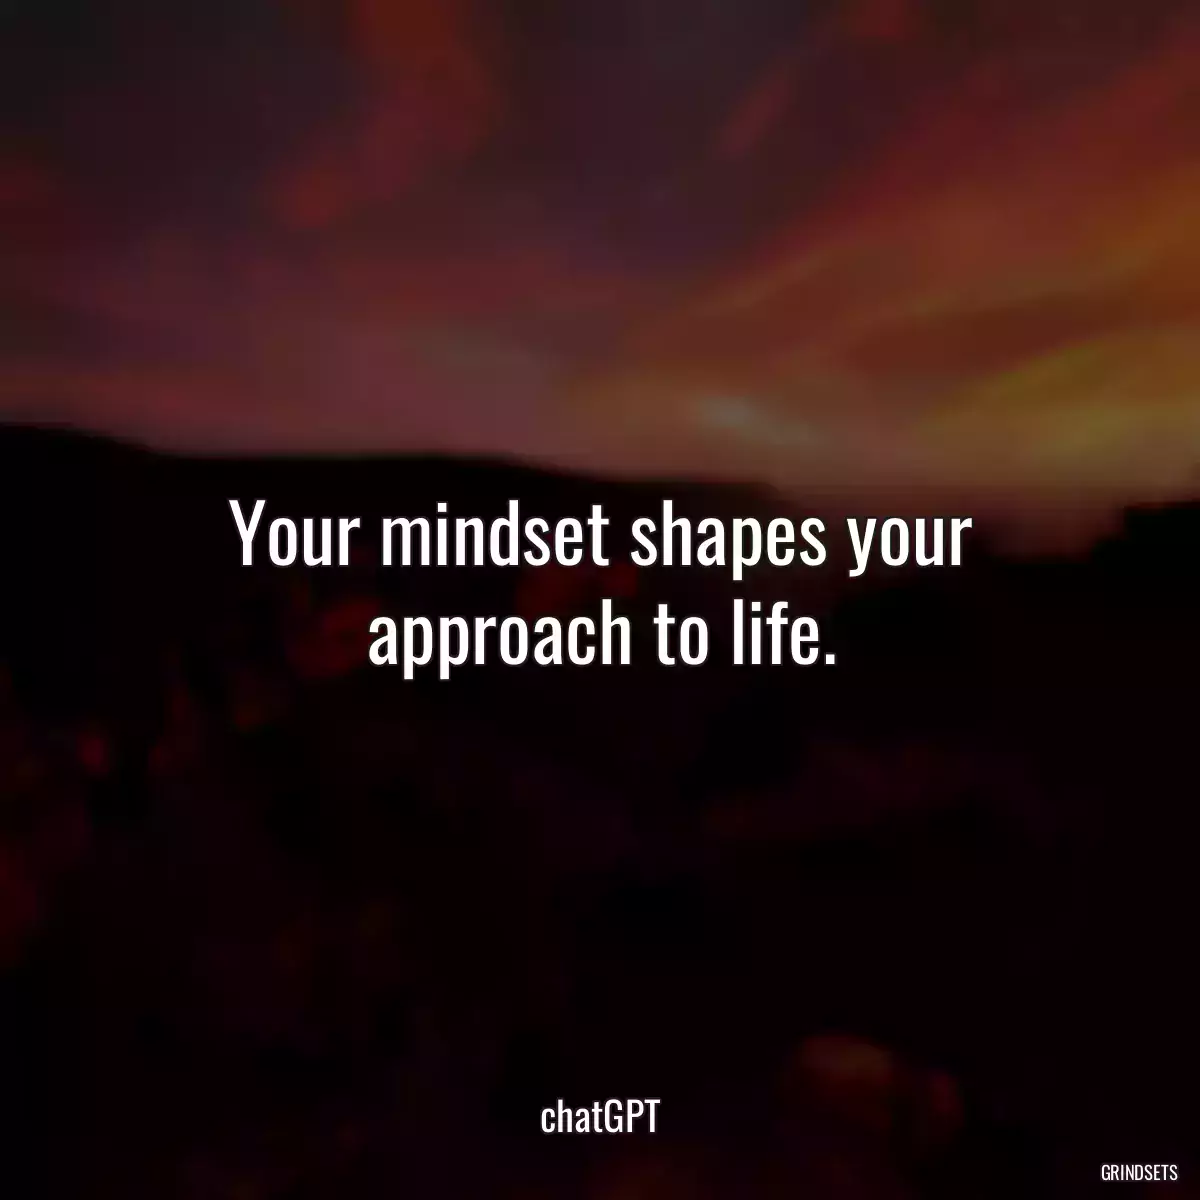 Your mindset shapes your approach to life.